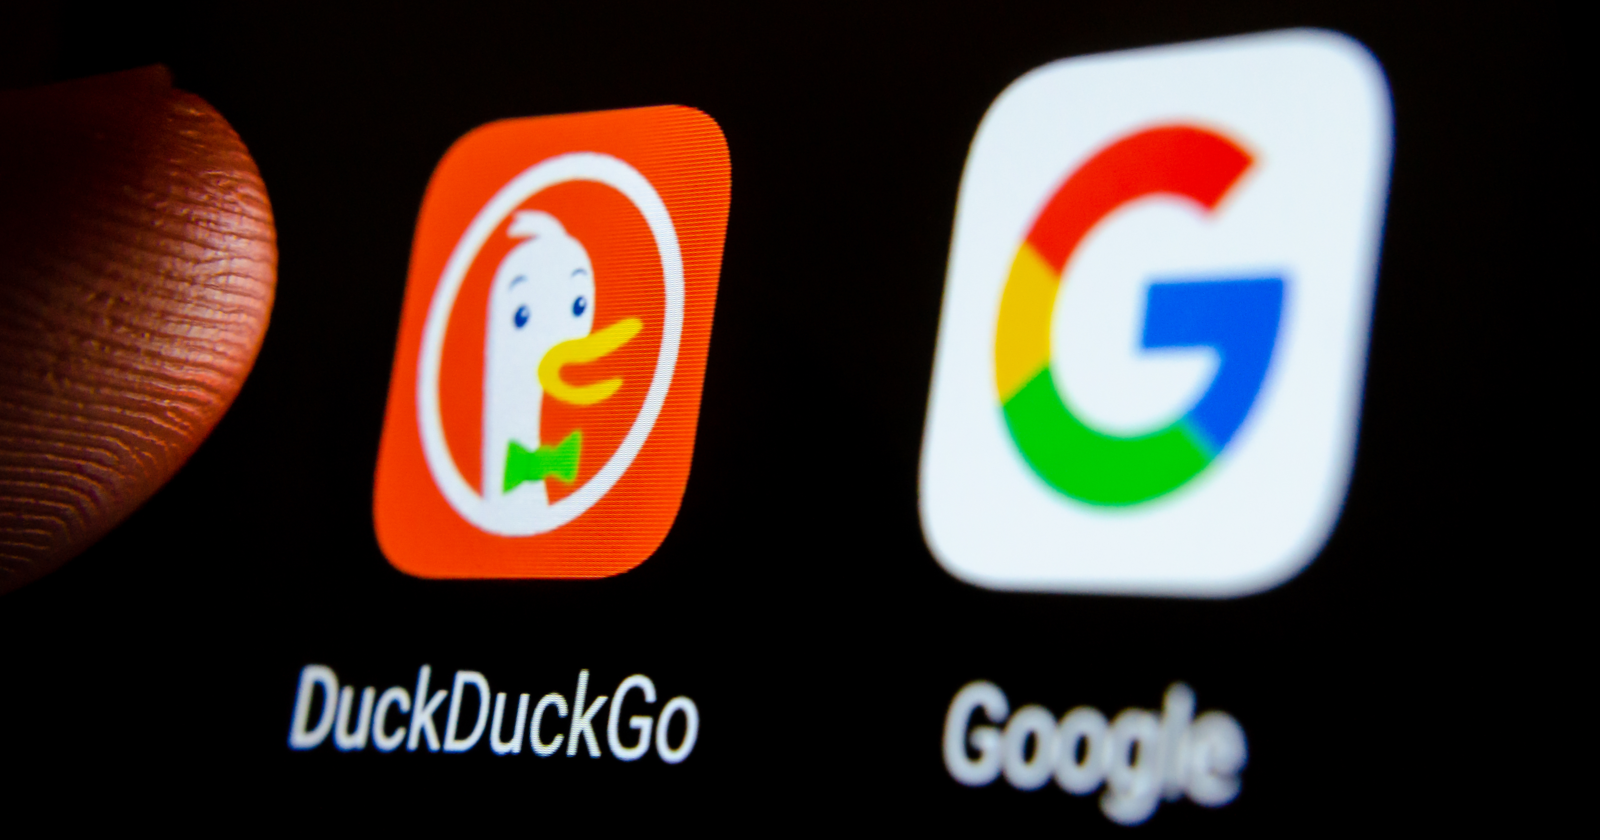 Google vs DuckDuckGo: A Comprehensive Comparison of Privacy and Security Features